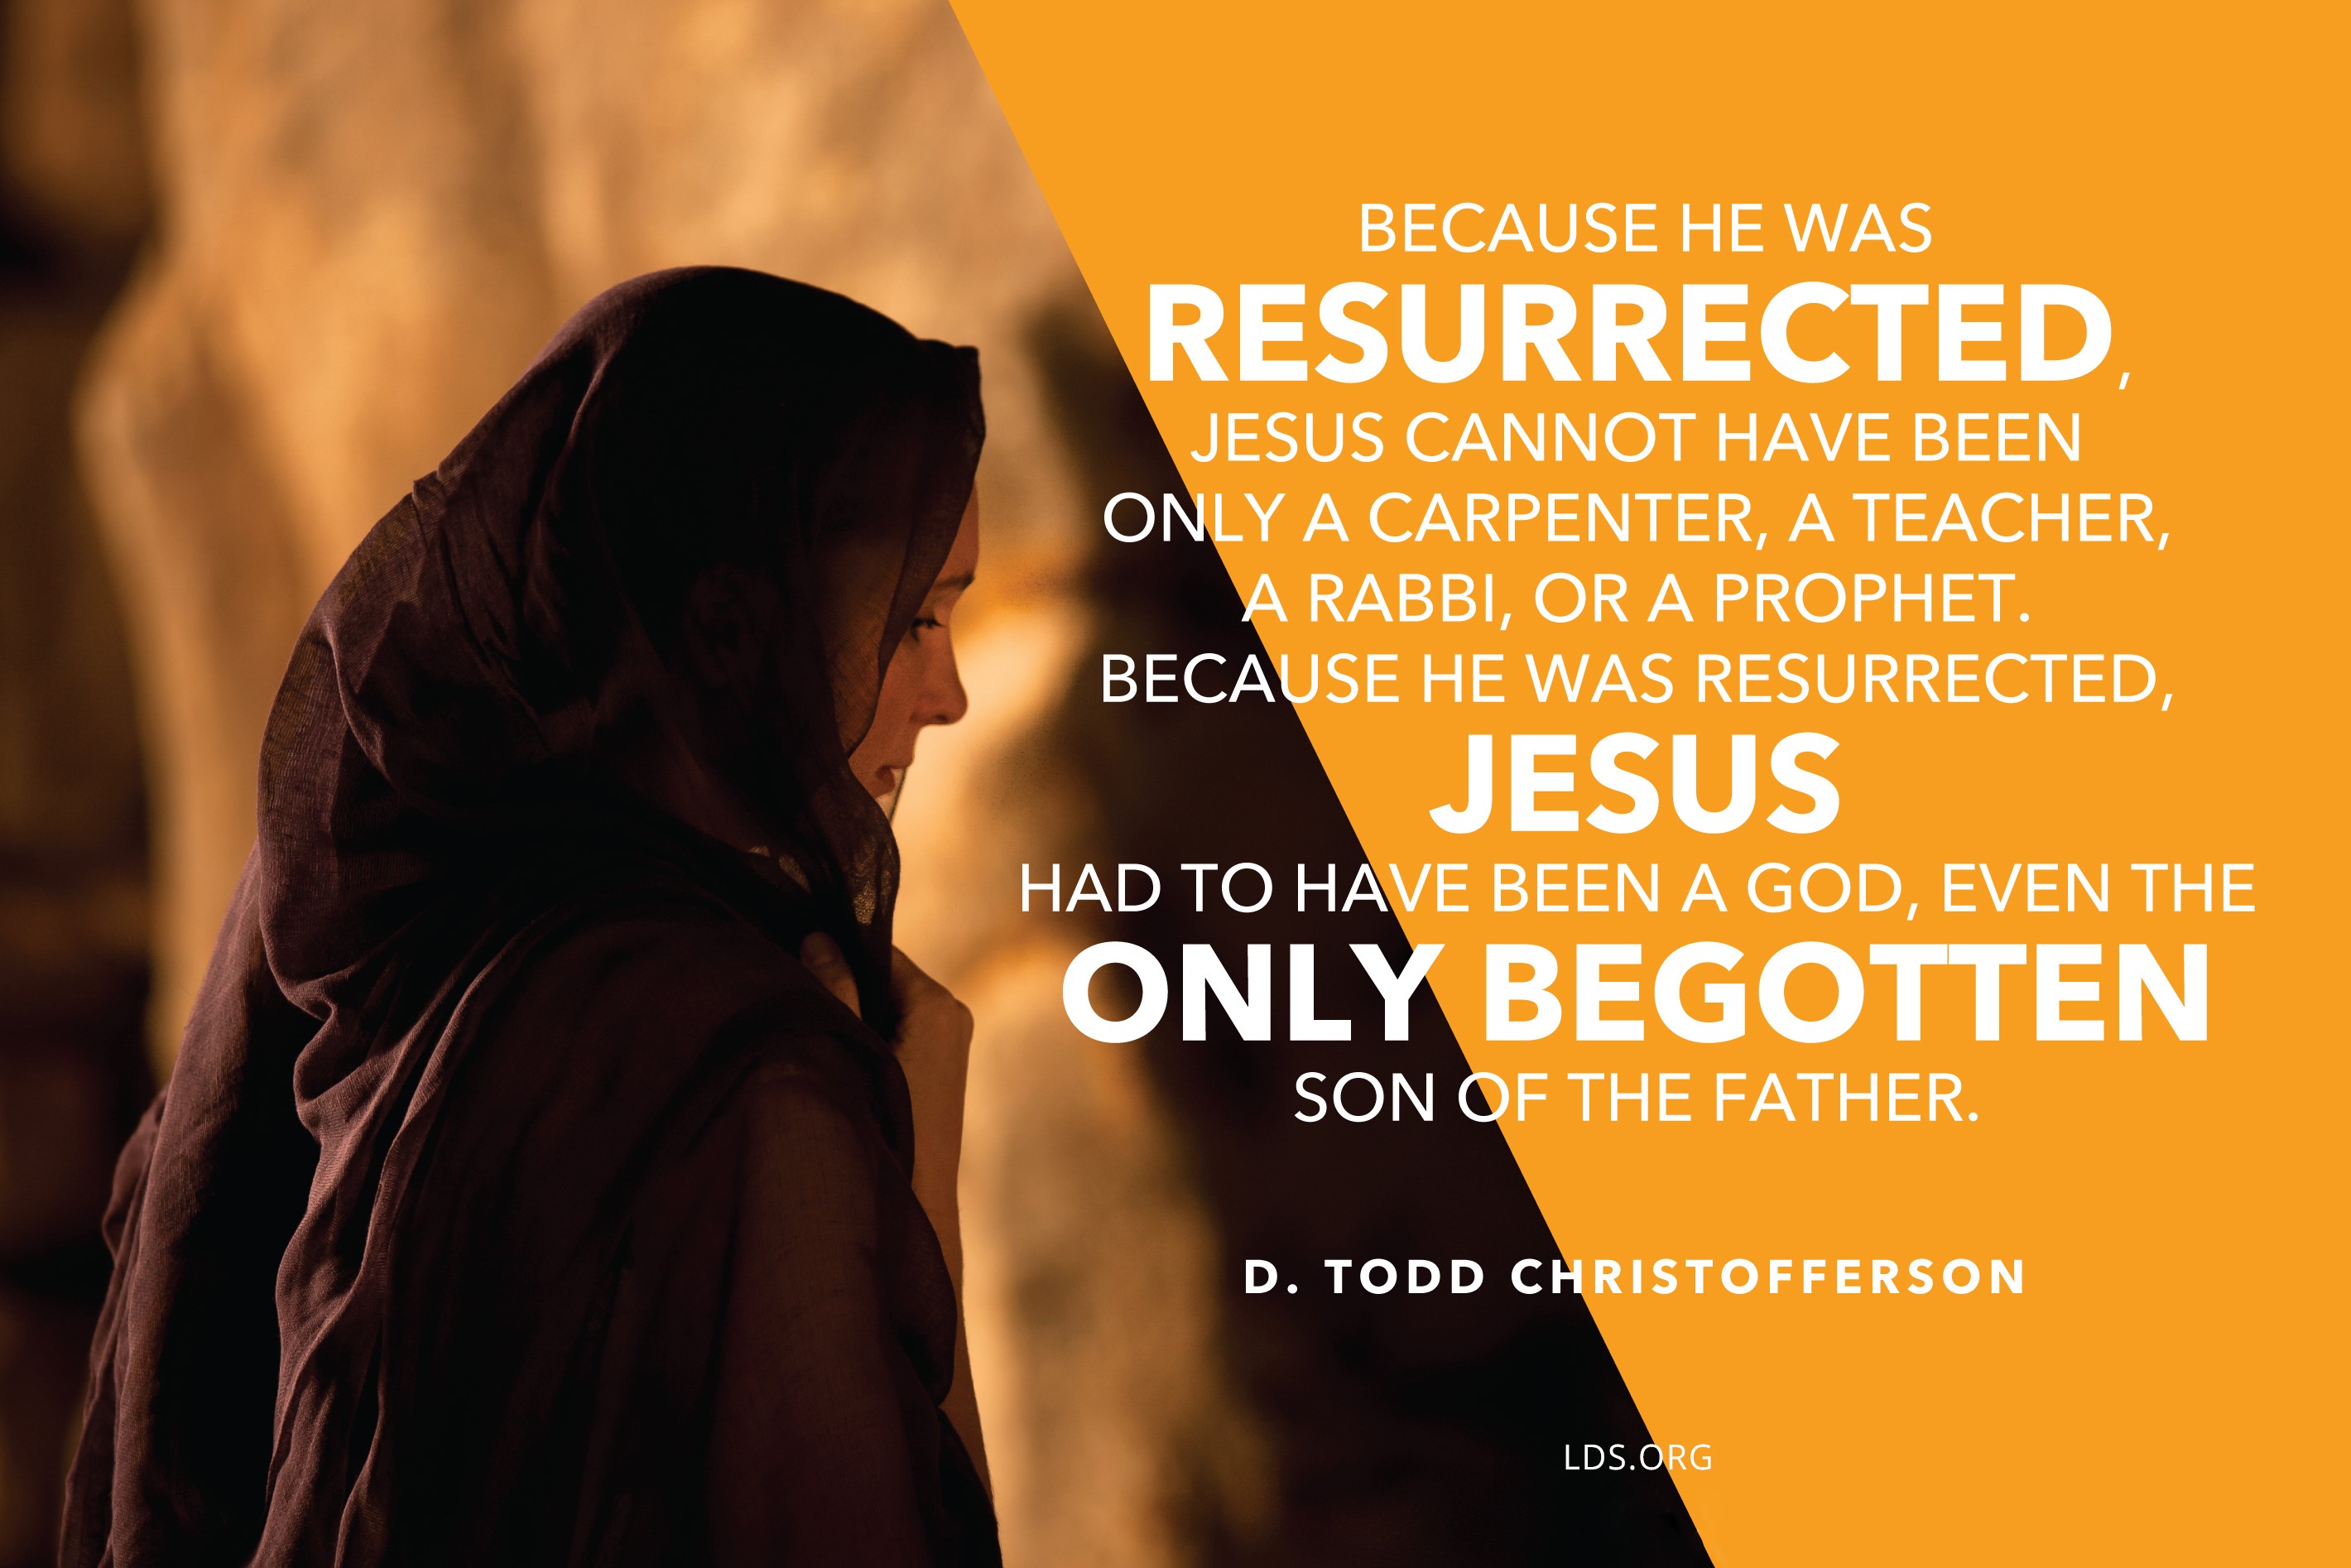 An image of Mary at the tomb, coupled with a quote by Elder D. Todd Christofferson: “Because He was resurrected, … Jesus had to have been a God.”